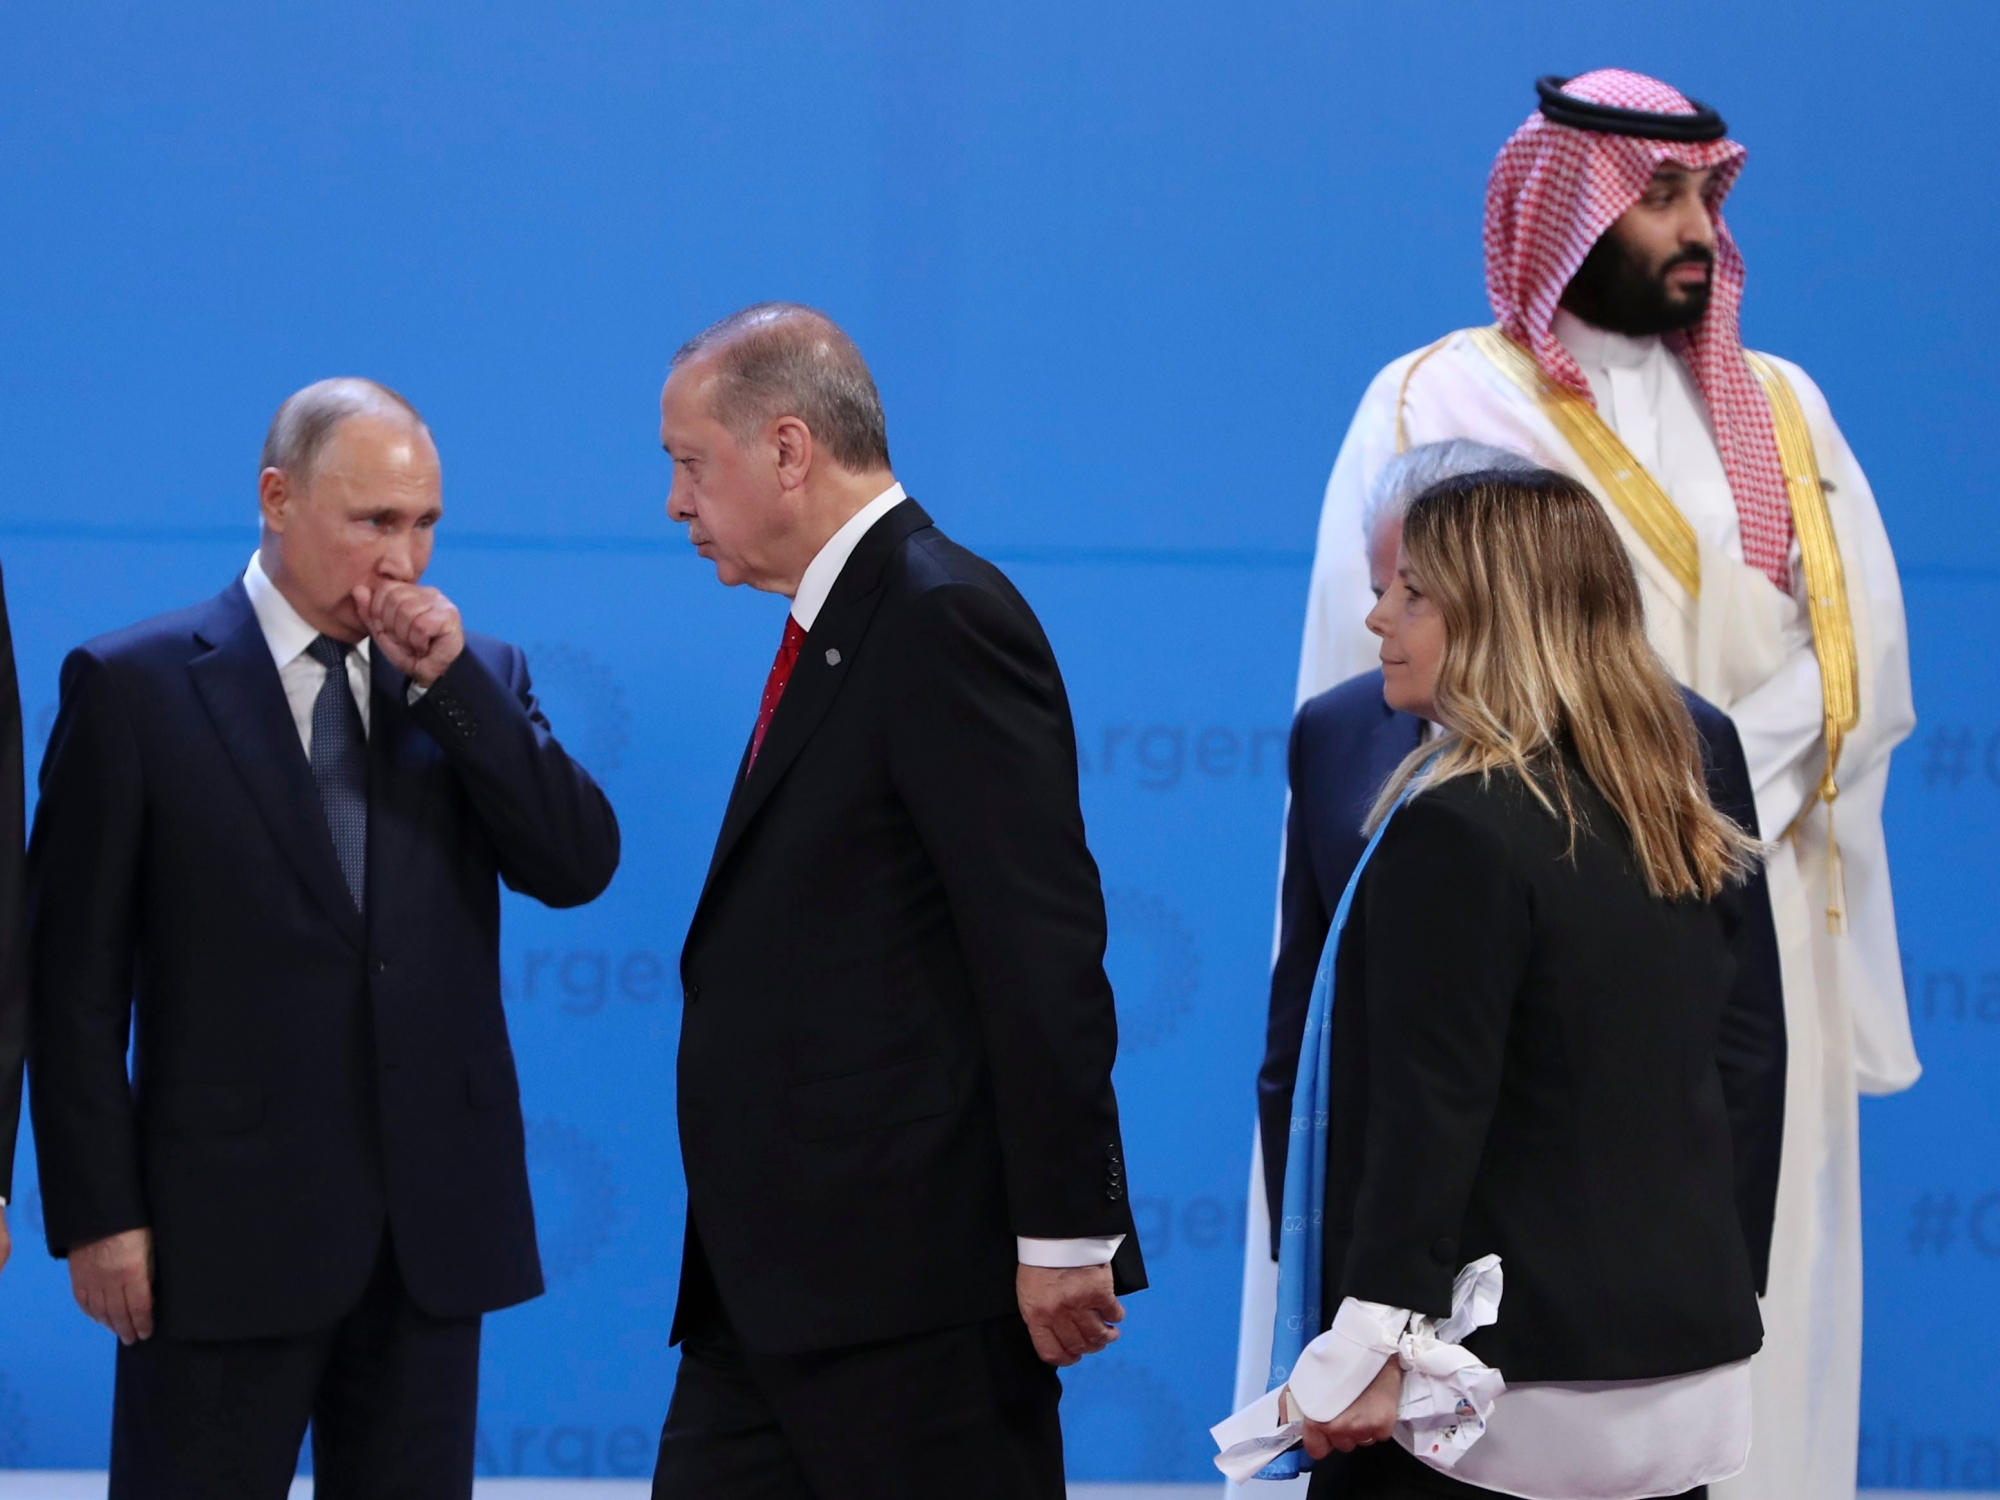 Russia's President Vladimir Putin, left, Turkey's President Recep Tayyip Erdogan, second from left, and Saudi Arabia's Crown Prince Mohammed bin Salman, right, arrive for the family photo of the G20 Leader's Summit at the Costa Salguero Center in Buenos Aires, Argentina, Friday, Nov. 30, 2018. (AP Photo/Ricardo Mazalan) Argentina G20 Summit